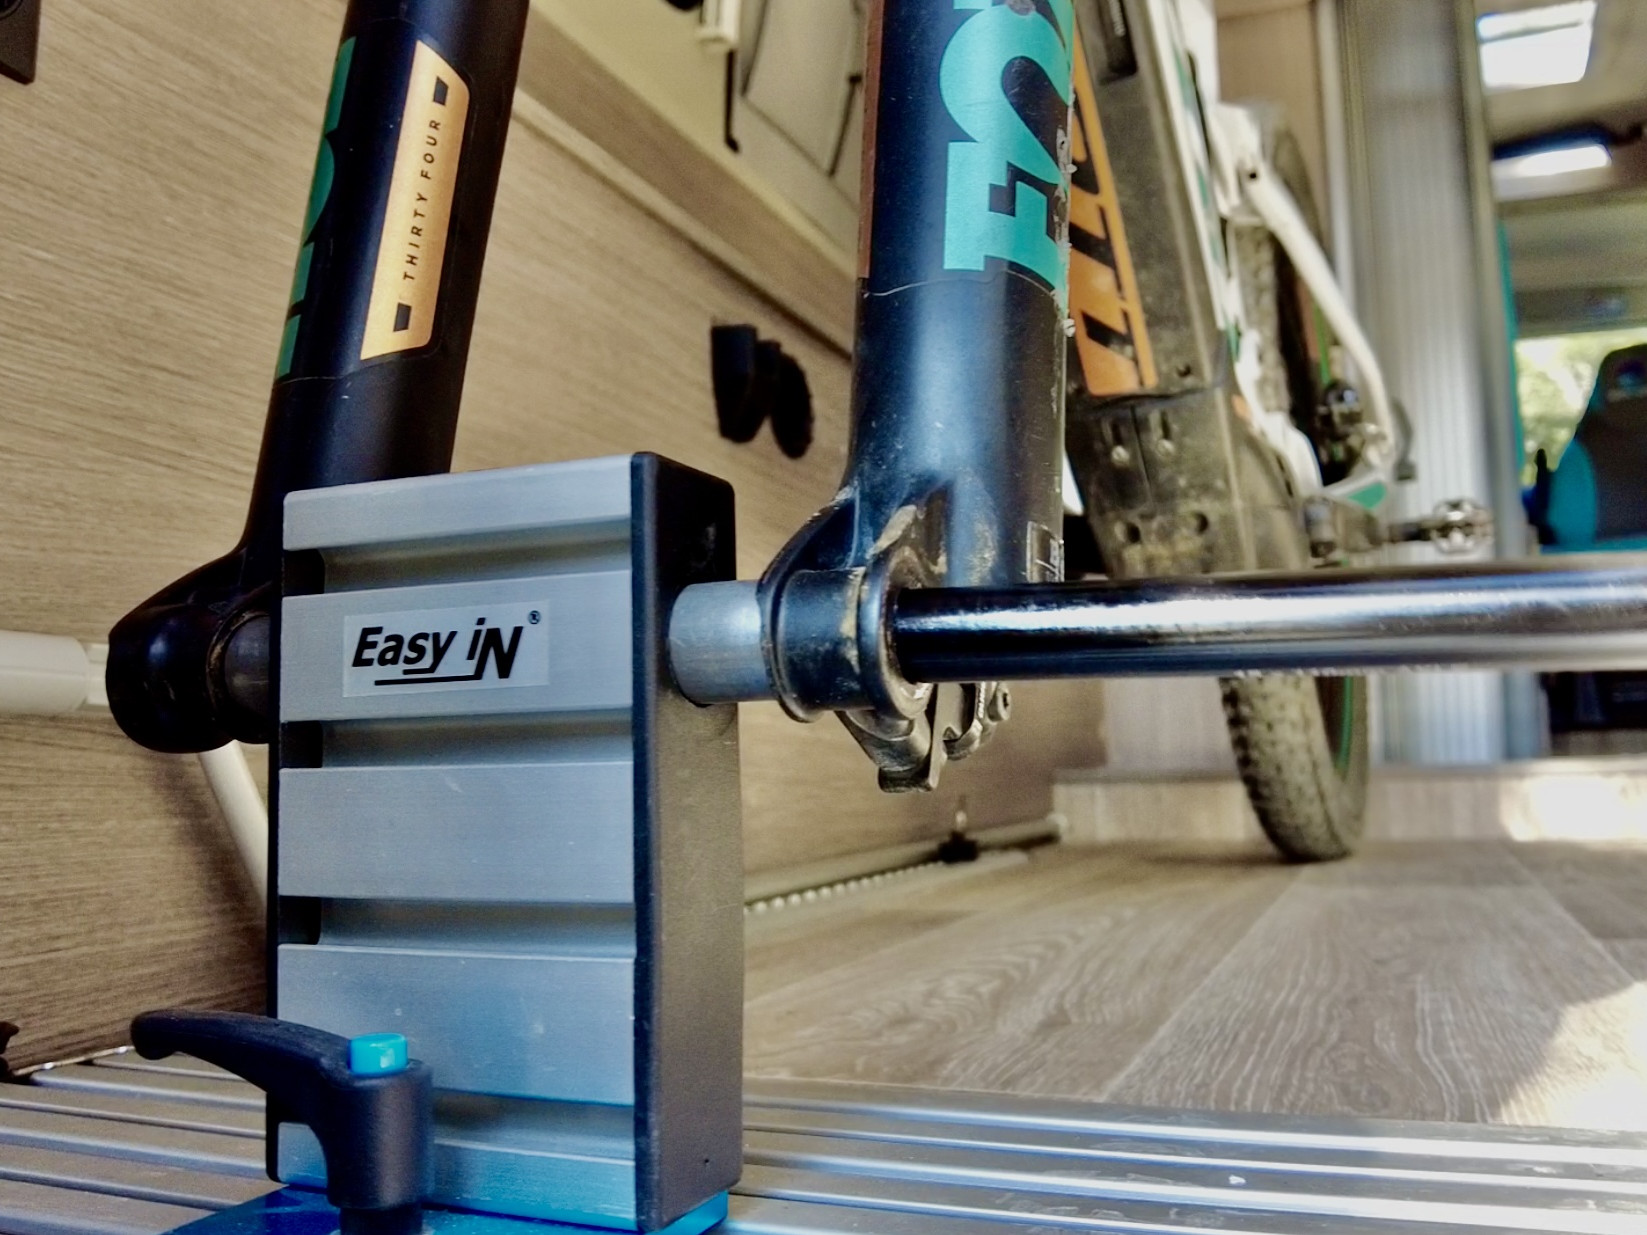 Fix your bike inside the campervan with the easyin rack